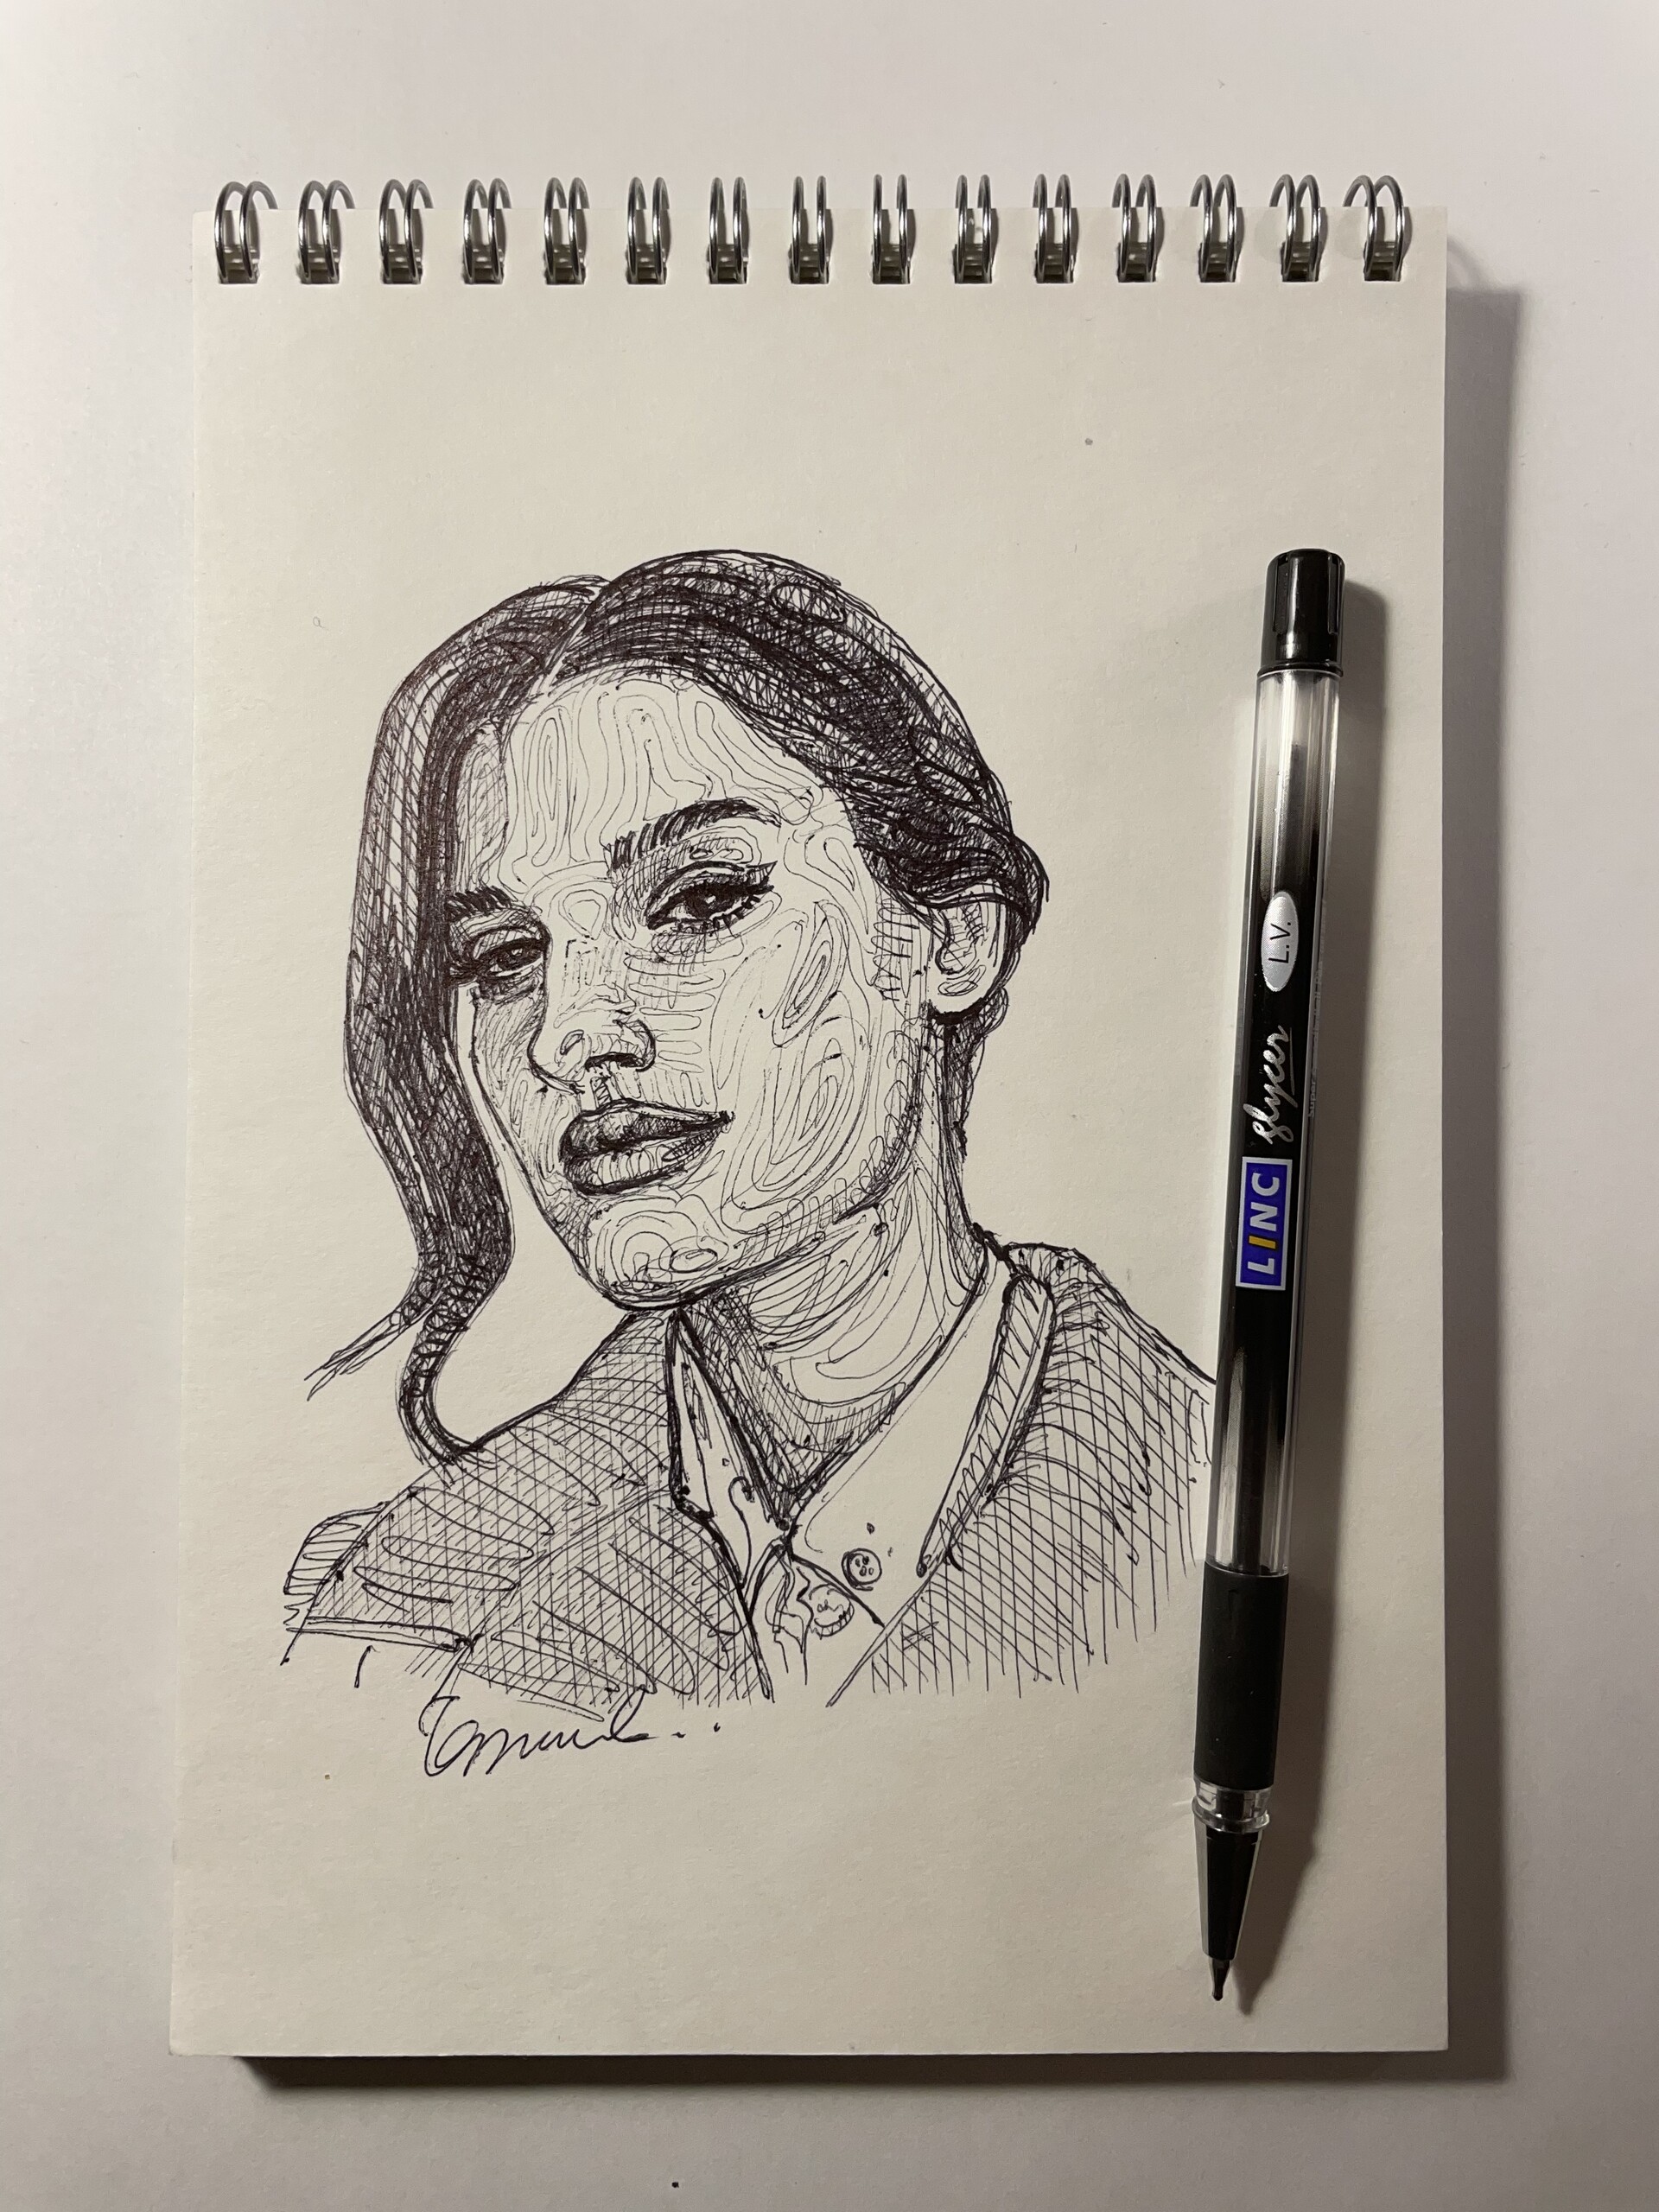 Watercolor artist sikander - Quick pen drawing with ballpoint pen  #sketchbook #sketches #sketch #sketching #pensketch #drawing #draw #art  #portrait #girl #face #beauty #model